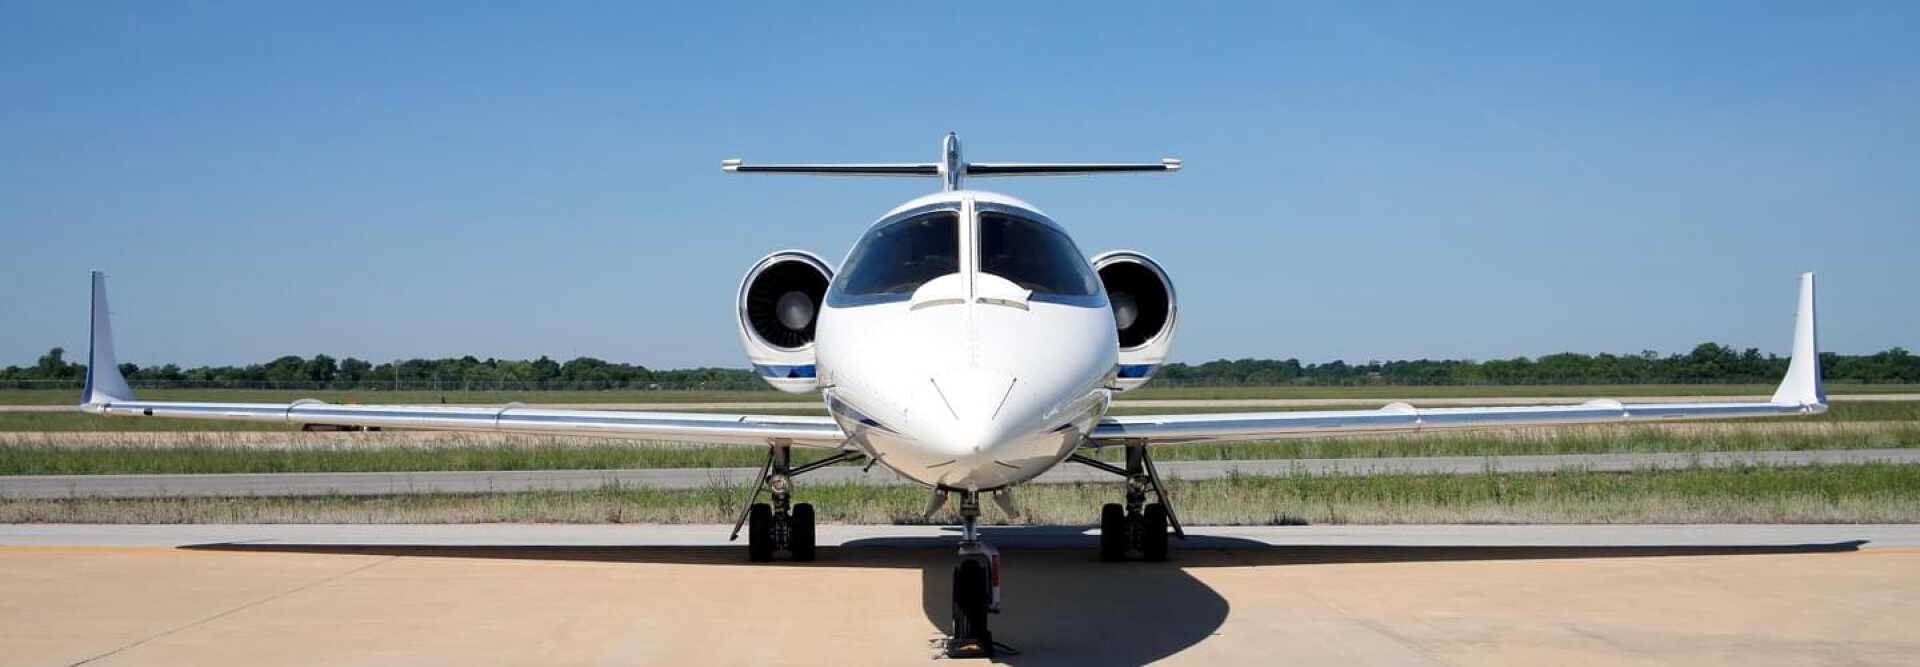 Super Light Jet Bombardier Learjet 45XR available for charter private jet charter with Lunajets, private flight, intercontinental flights, short-haul